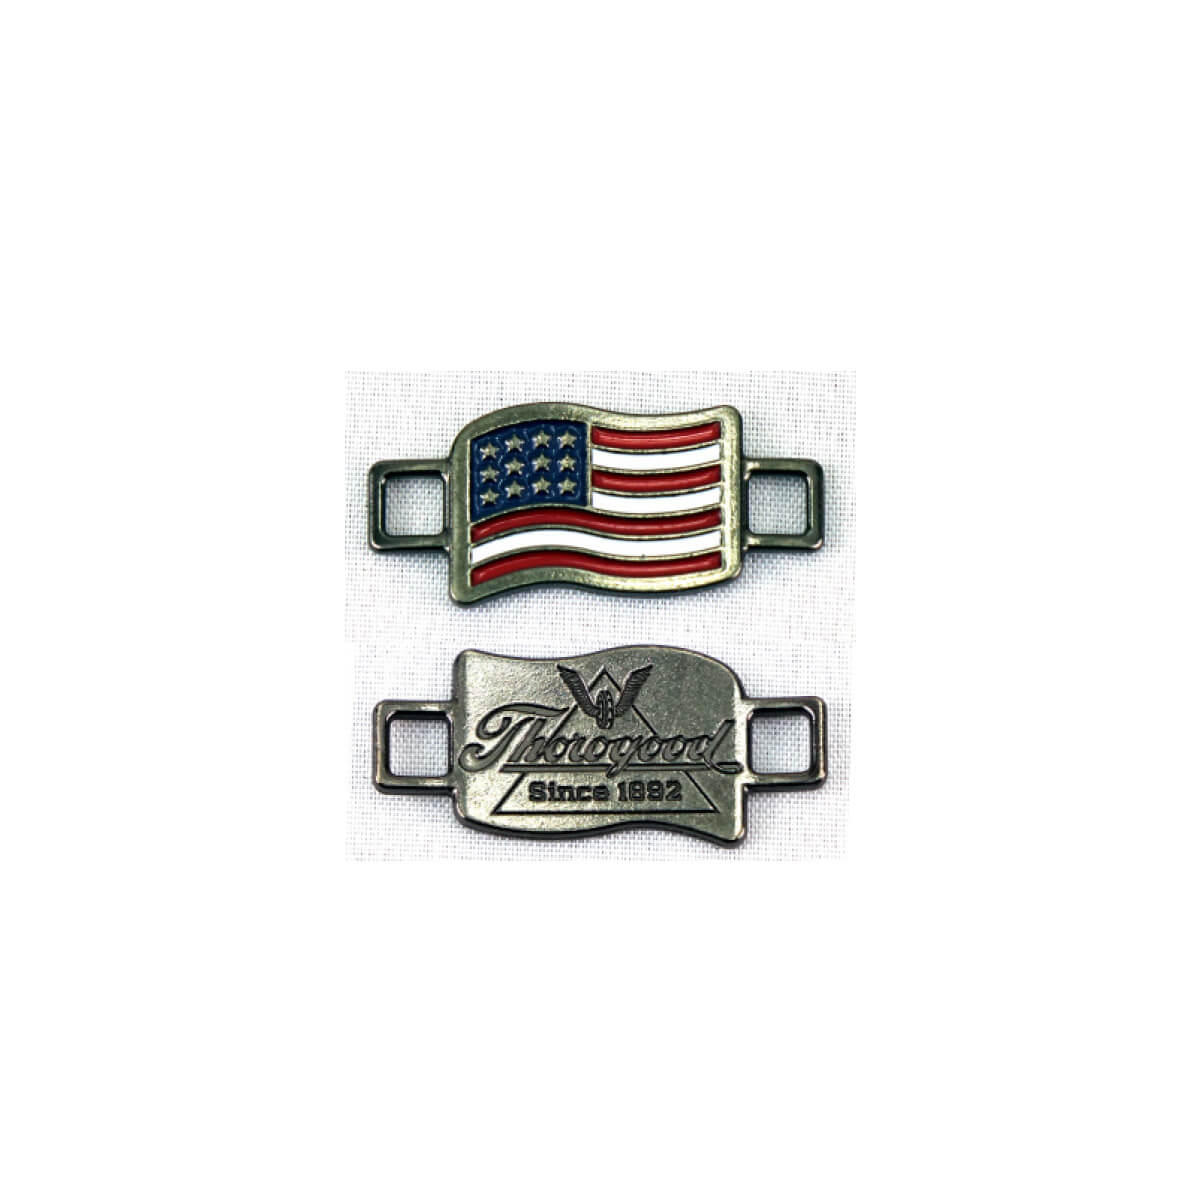 BrooklynMaker USA Flags Shoes Boot Lace Keeper US American Union Workers Charm 